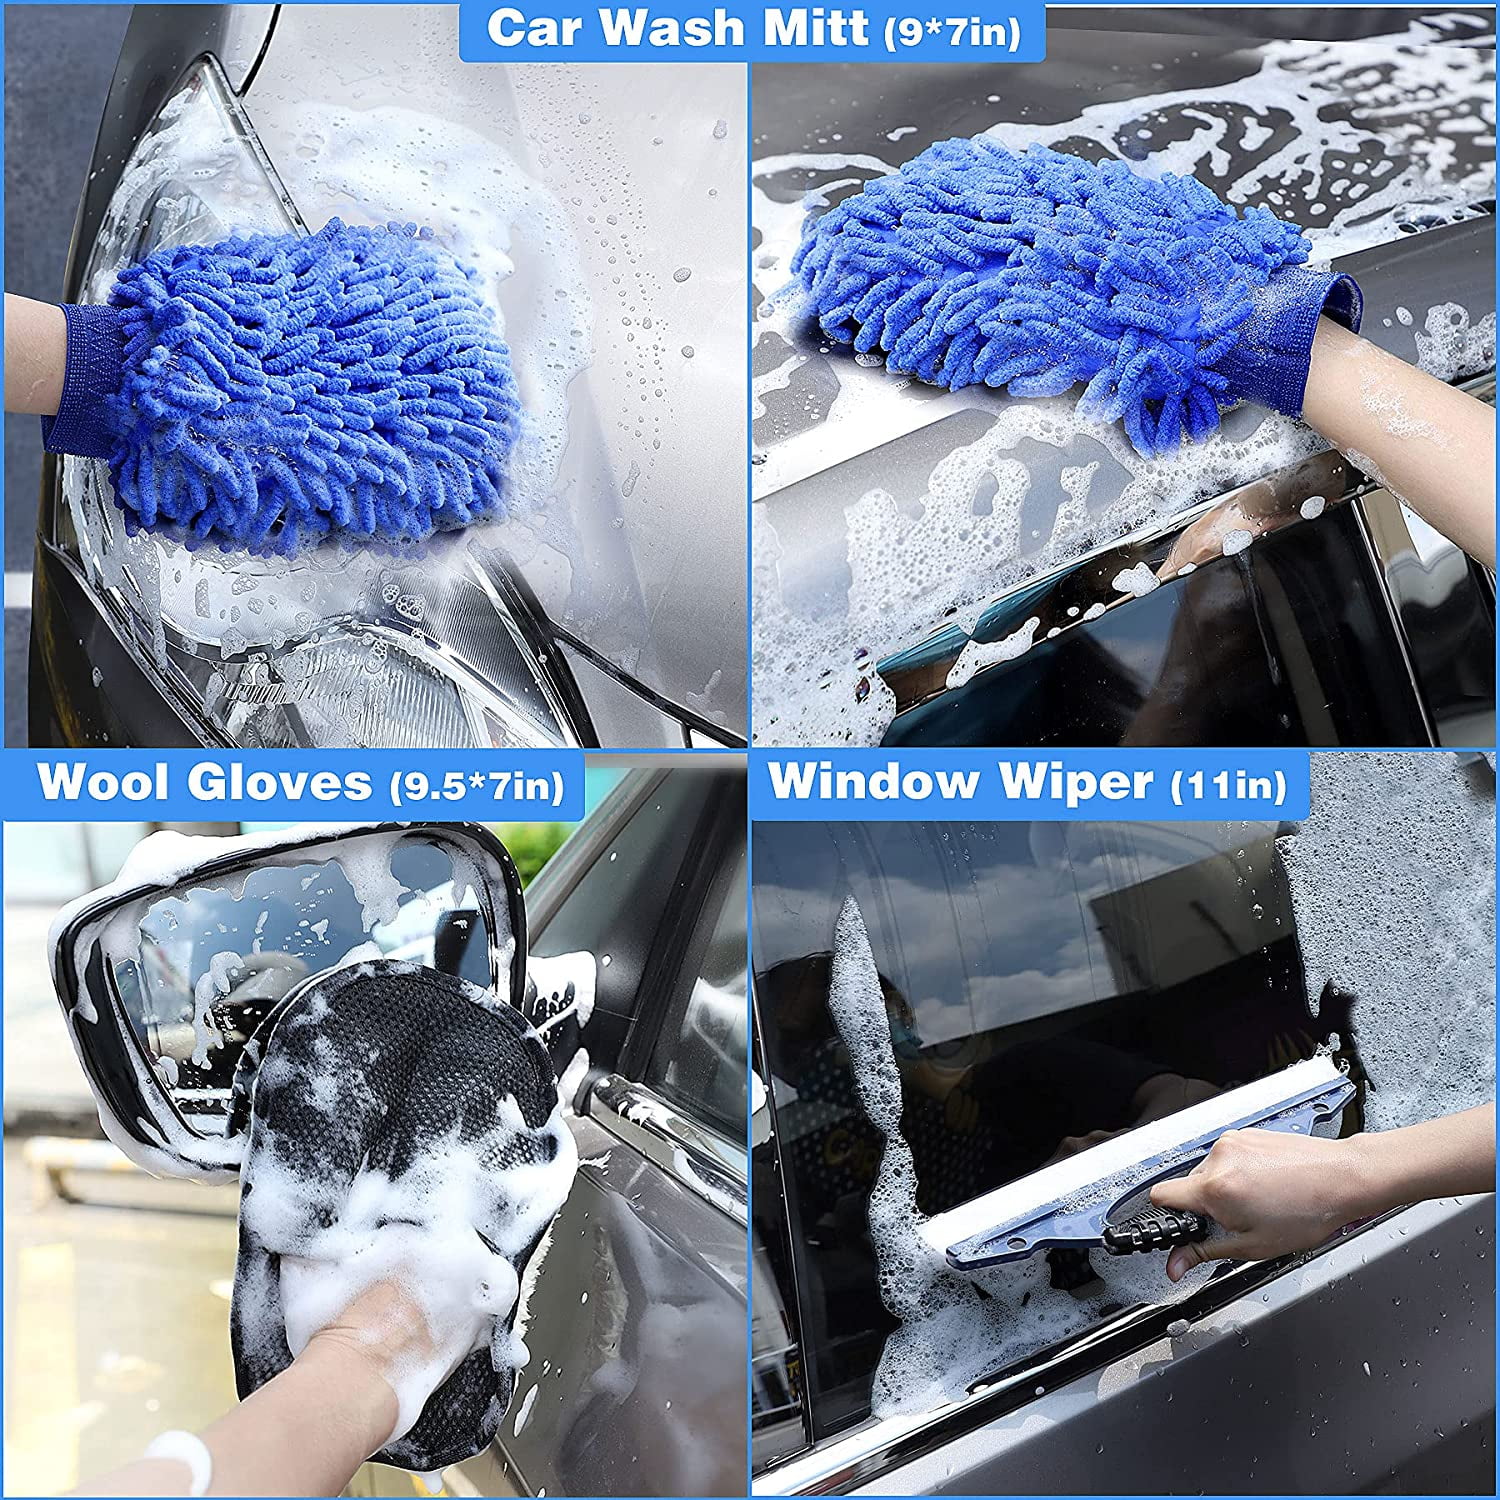 Car Wash Kit 16 Pcs Car Detailing Kit with Softer Microfiber Cleaning Cloth  Car Cleaning Kit Thicker Box Car Wash Mitt Duster Squeegee Tire Brush Car Cleaning  Supplies for All Surfaces 